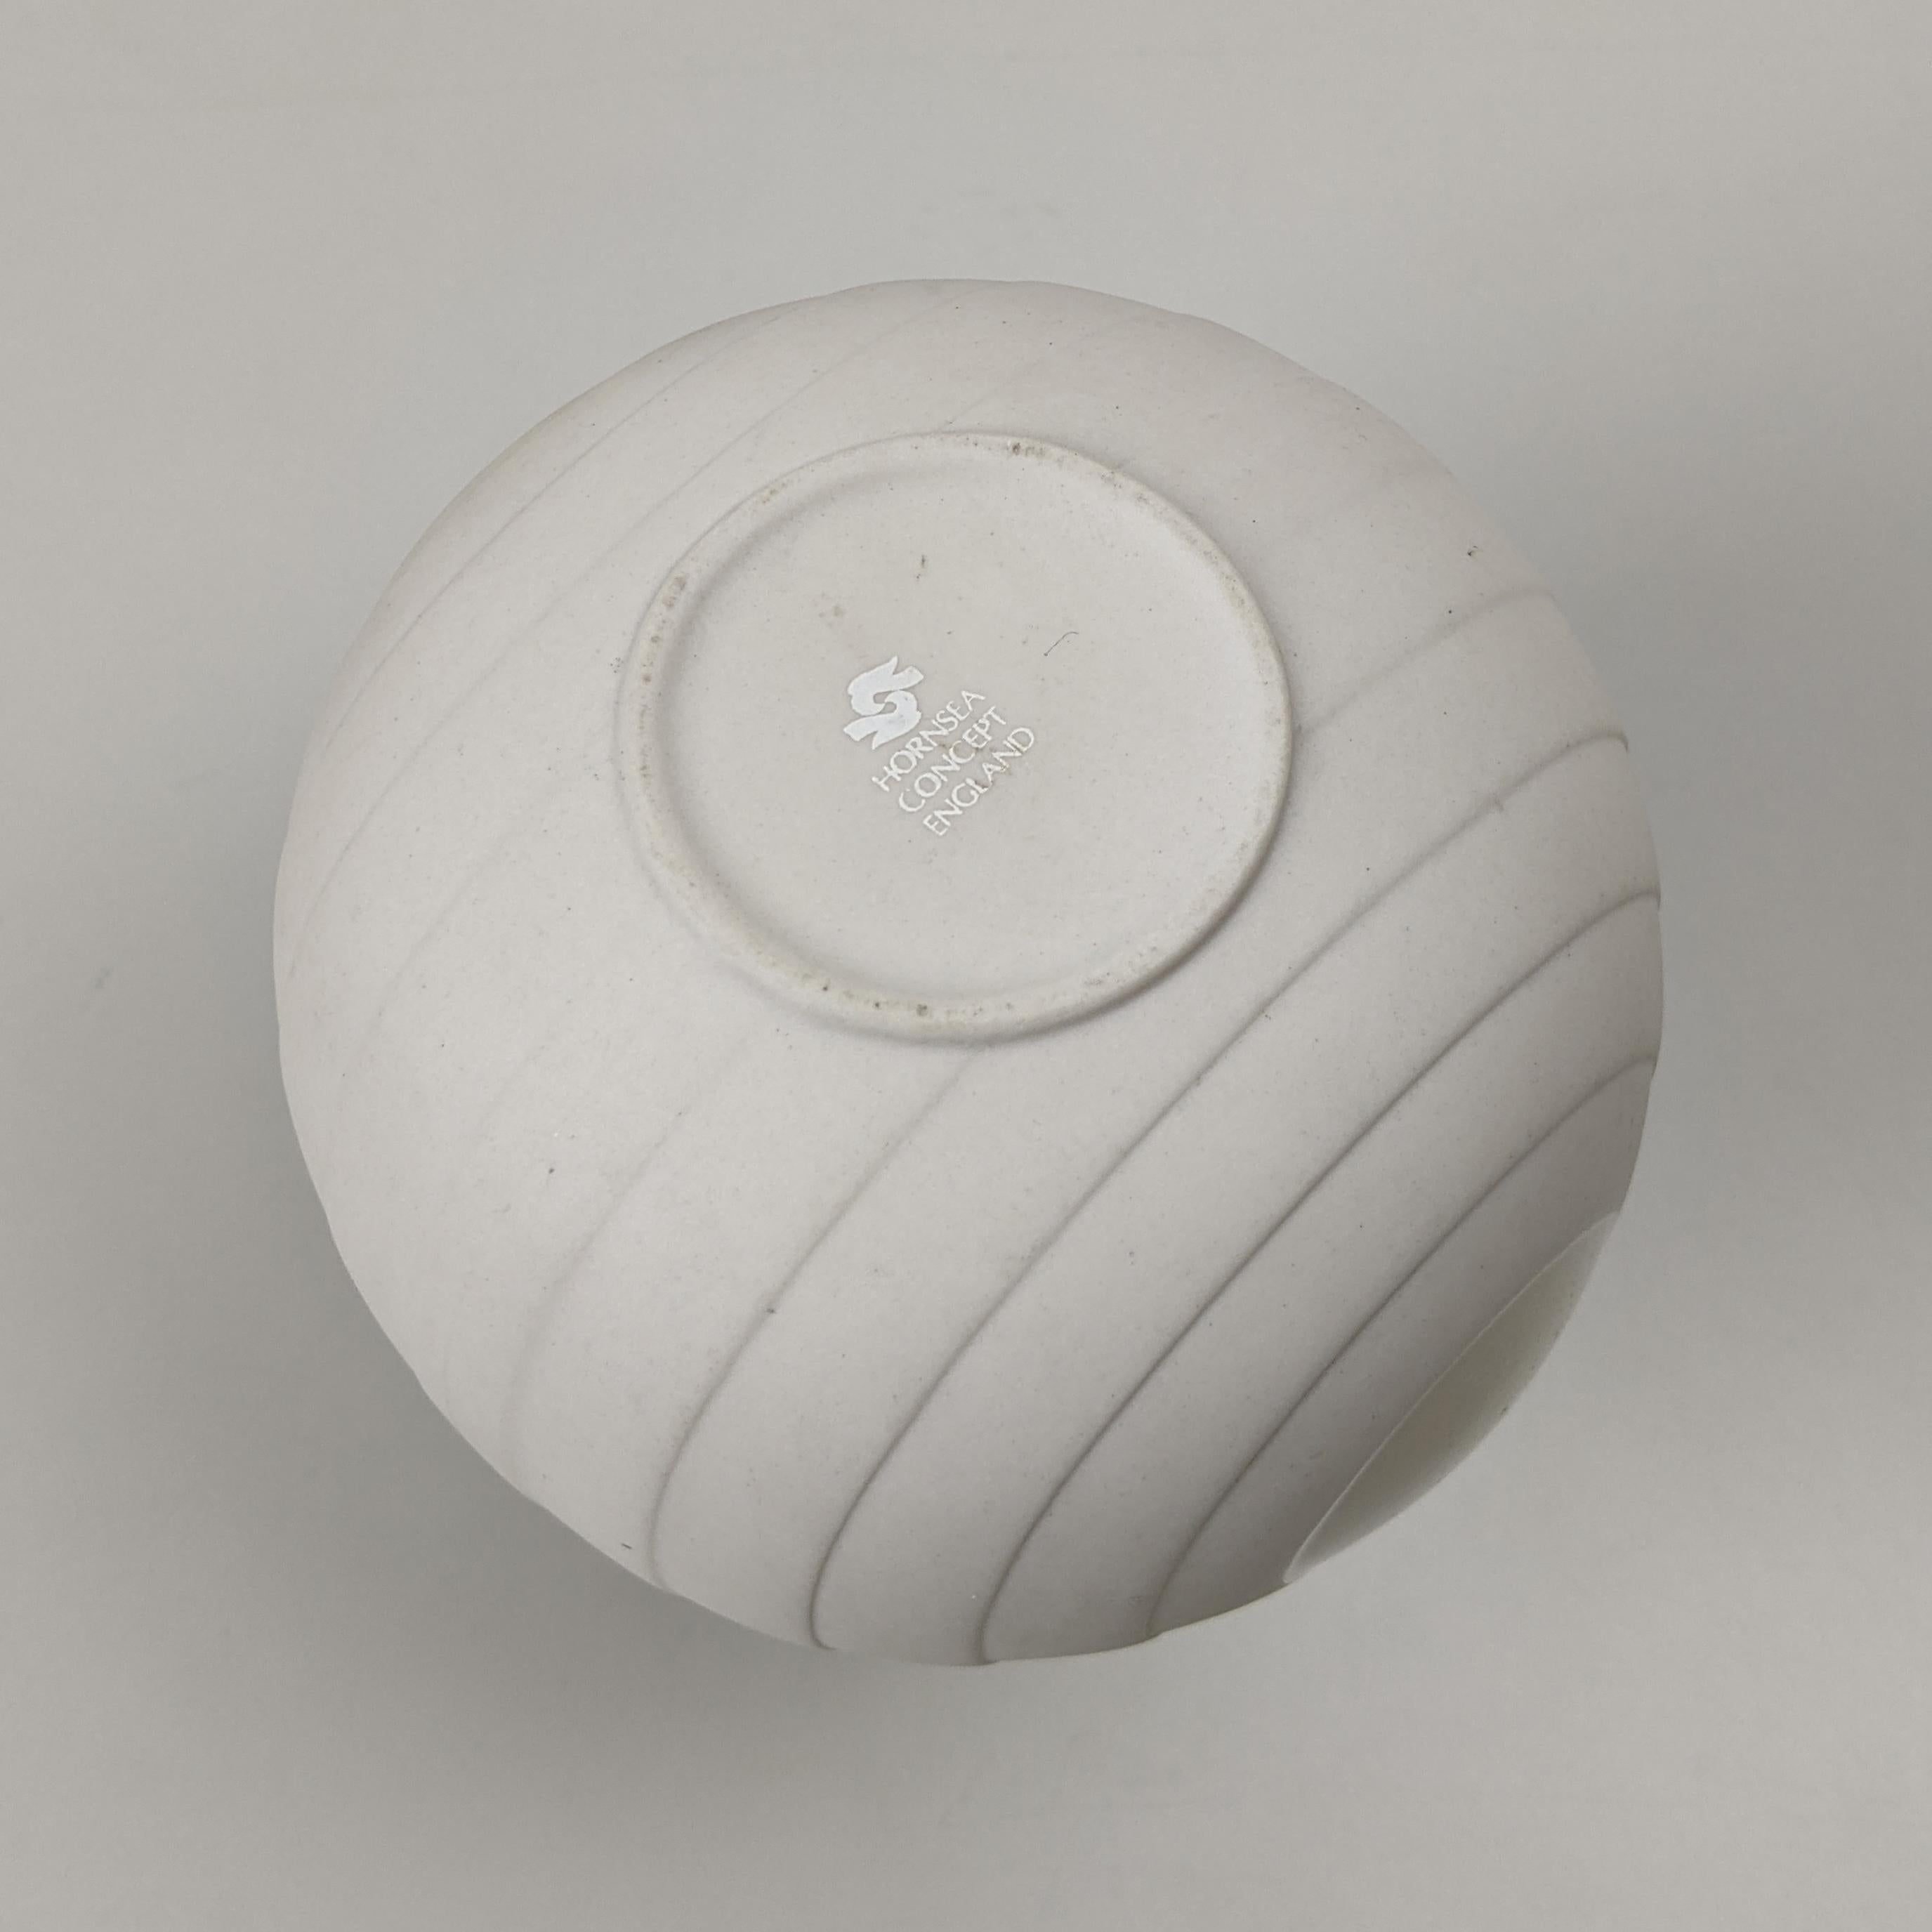 Ceramic Hornsea Small Vase from the ‘Concept’ Series, Designed 1977 by Martin Hunt